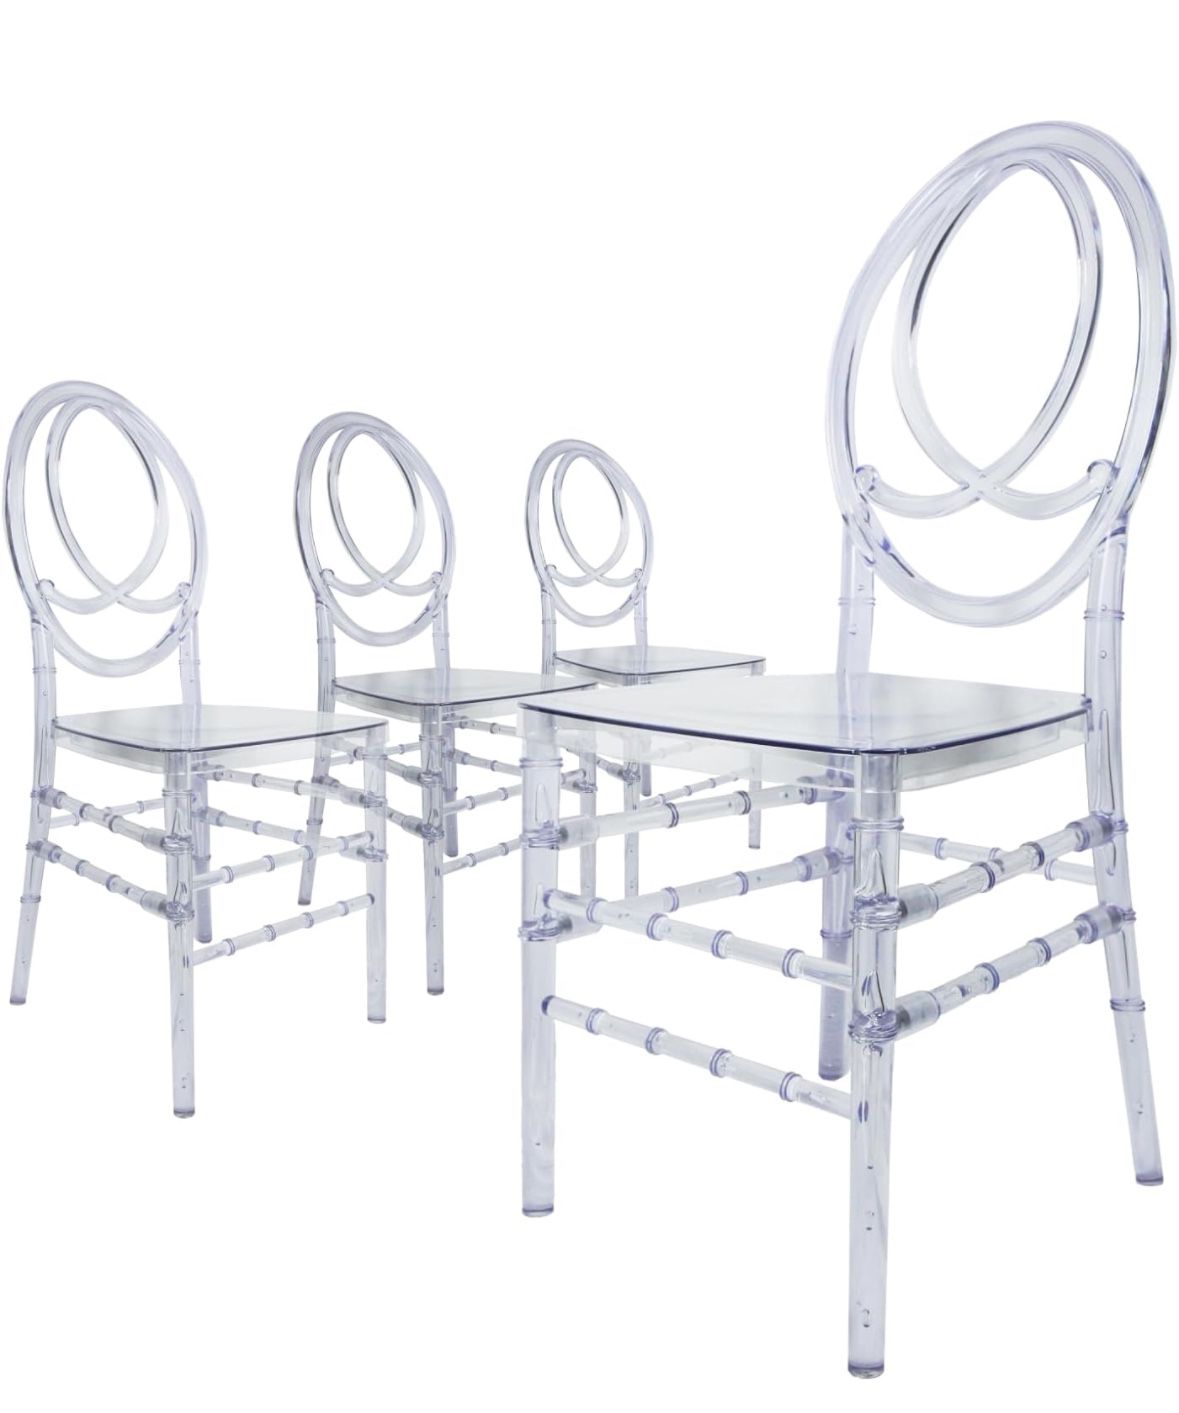 Set of 4 Acrylic Stacking Chairs, Clear Dining Chairs, Transparent Elegant Party Event Wedding Chairs, G34